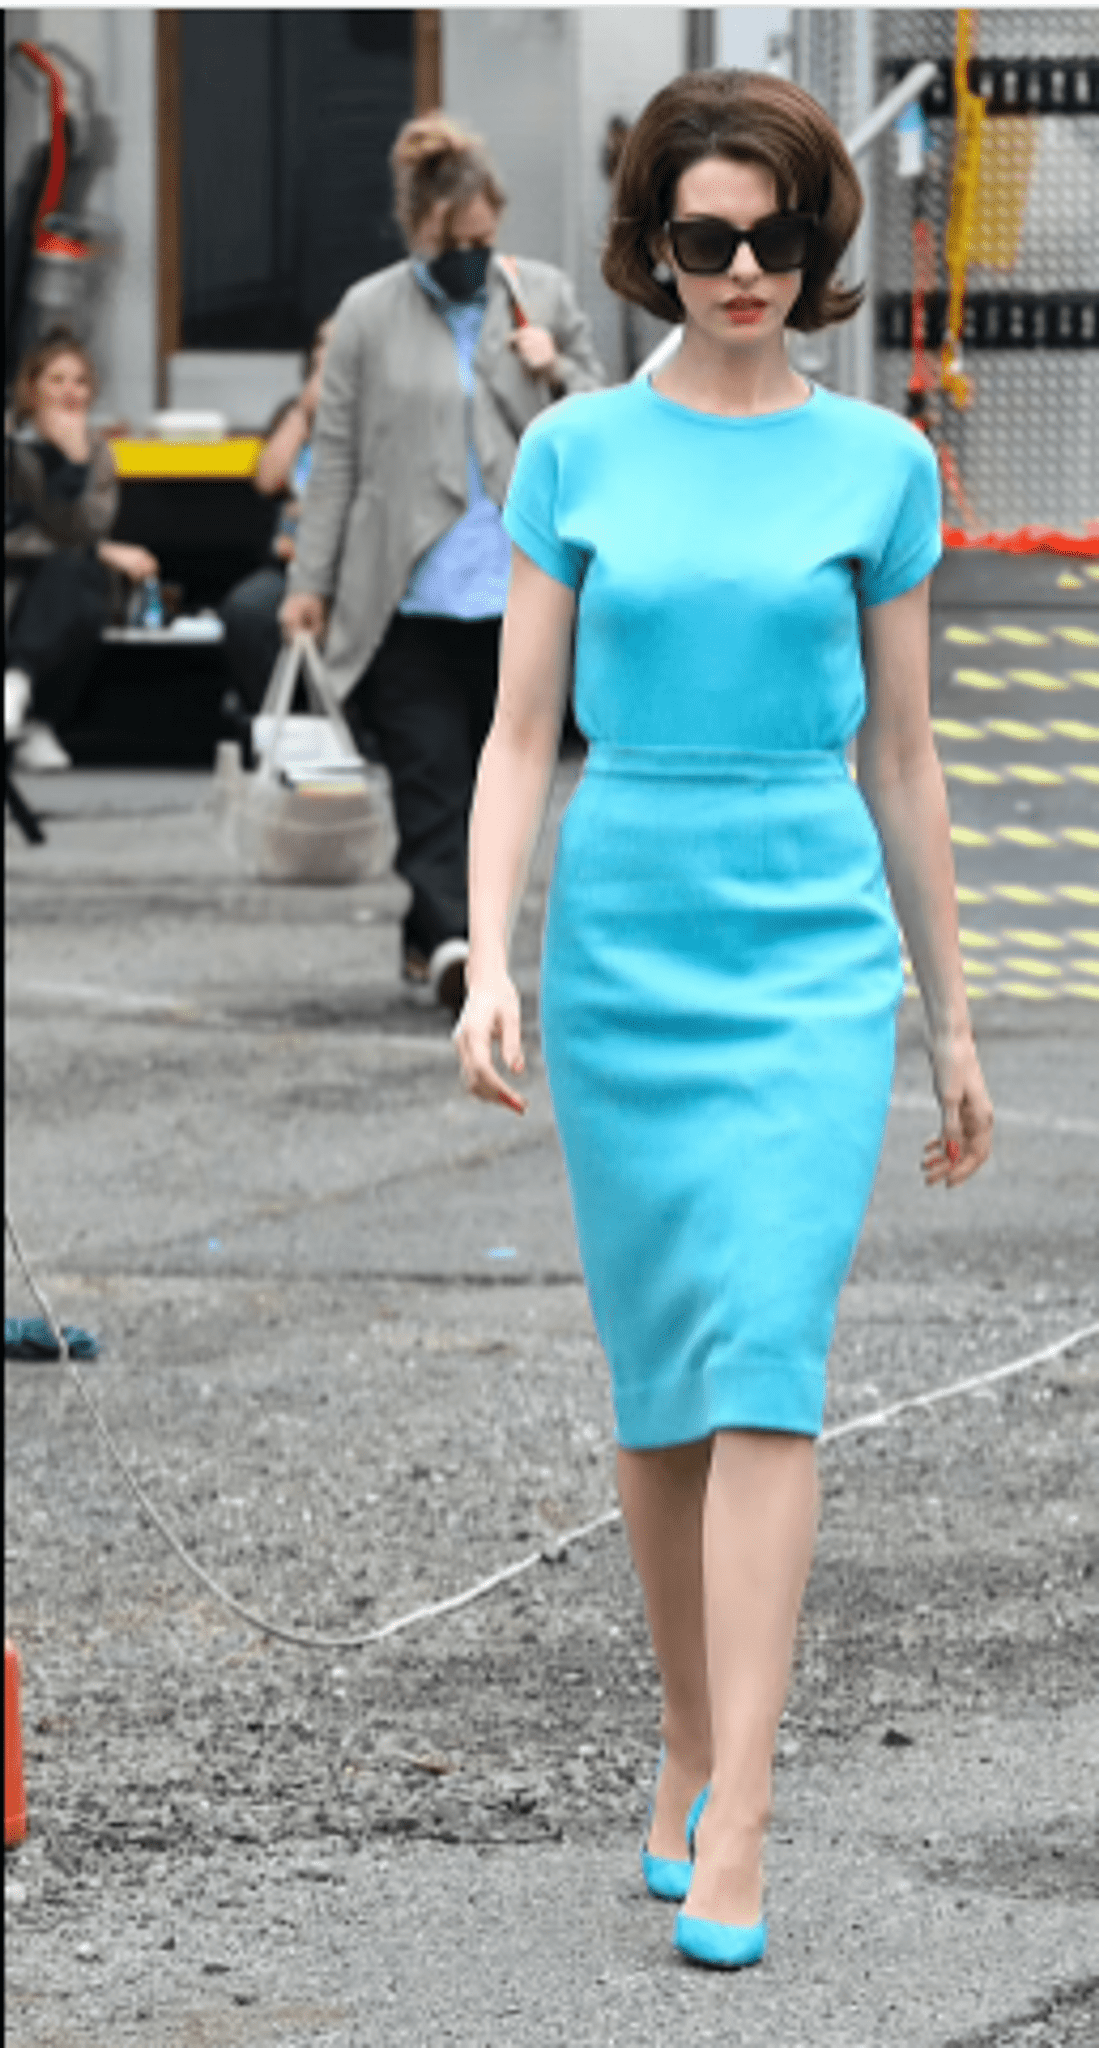 the-incomparable-anne-hathaway-changed-three-outfits-in-one-day-on-the-set-of-a-new-film